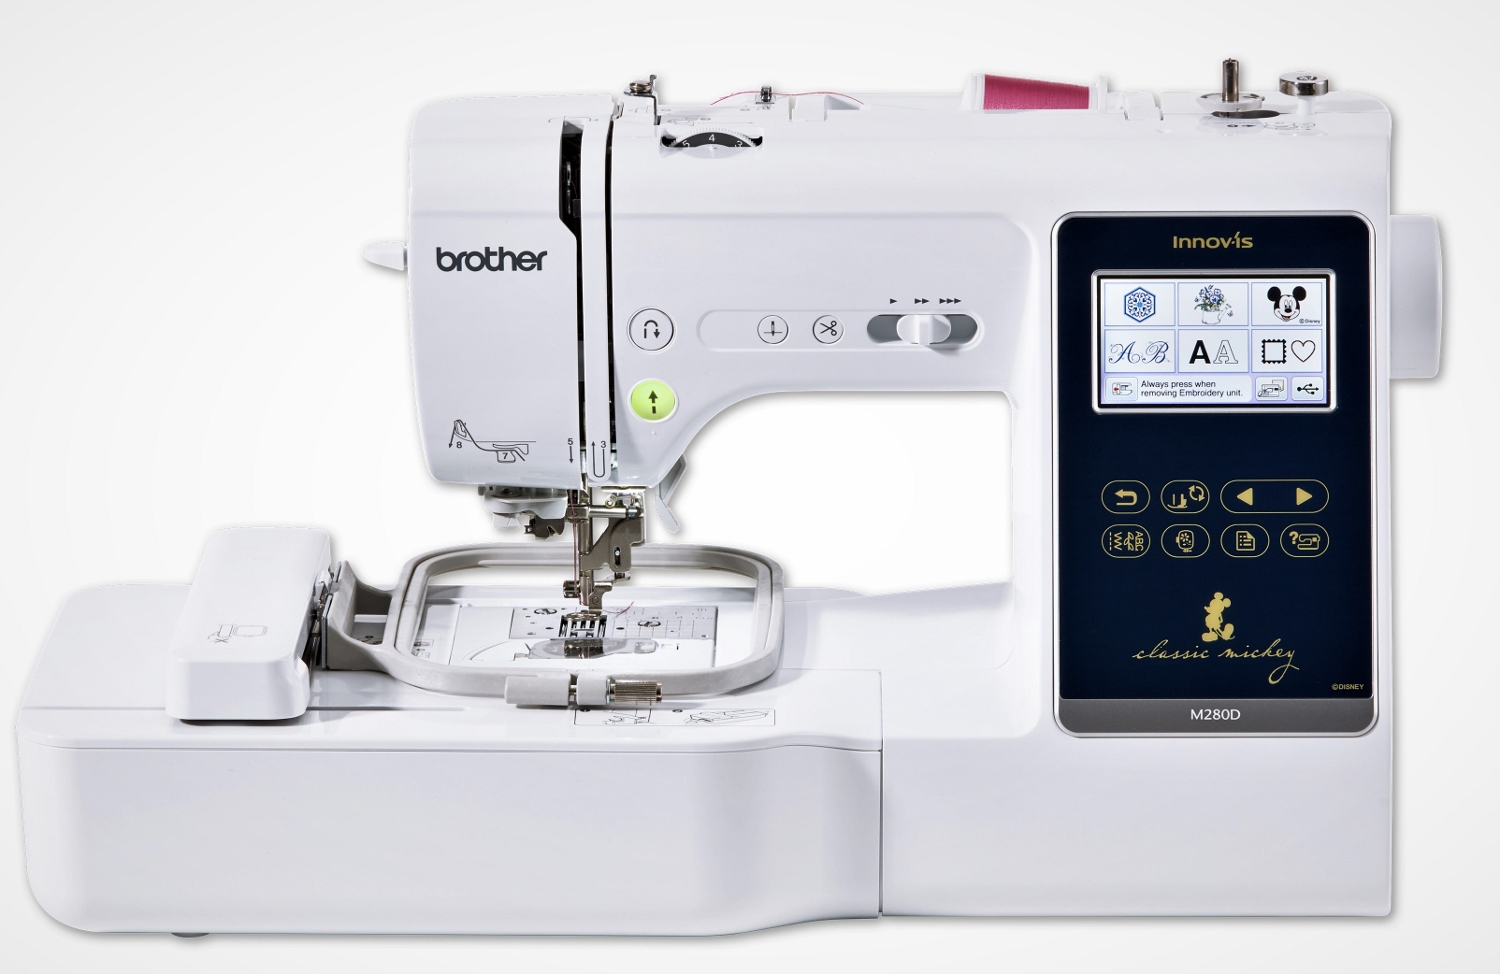 Brother Sewing Machine Embroidery Patterns Innov Is M280d Sewingembroidery Brother Brother Machines